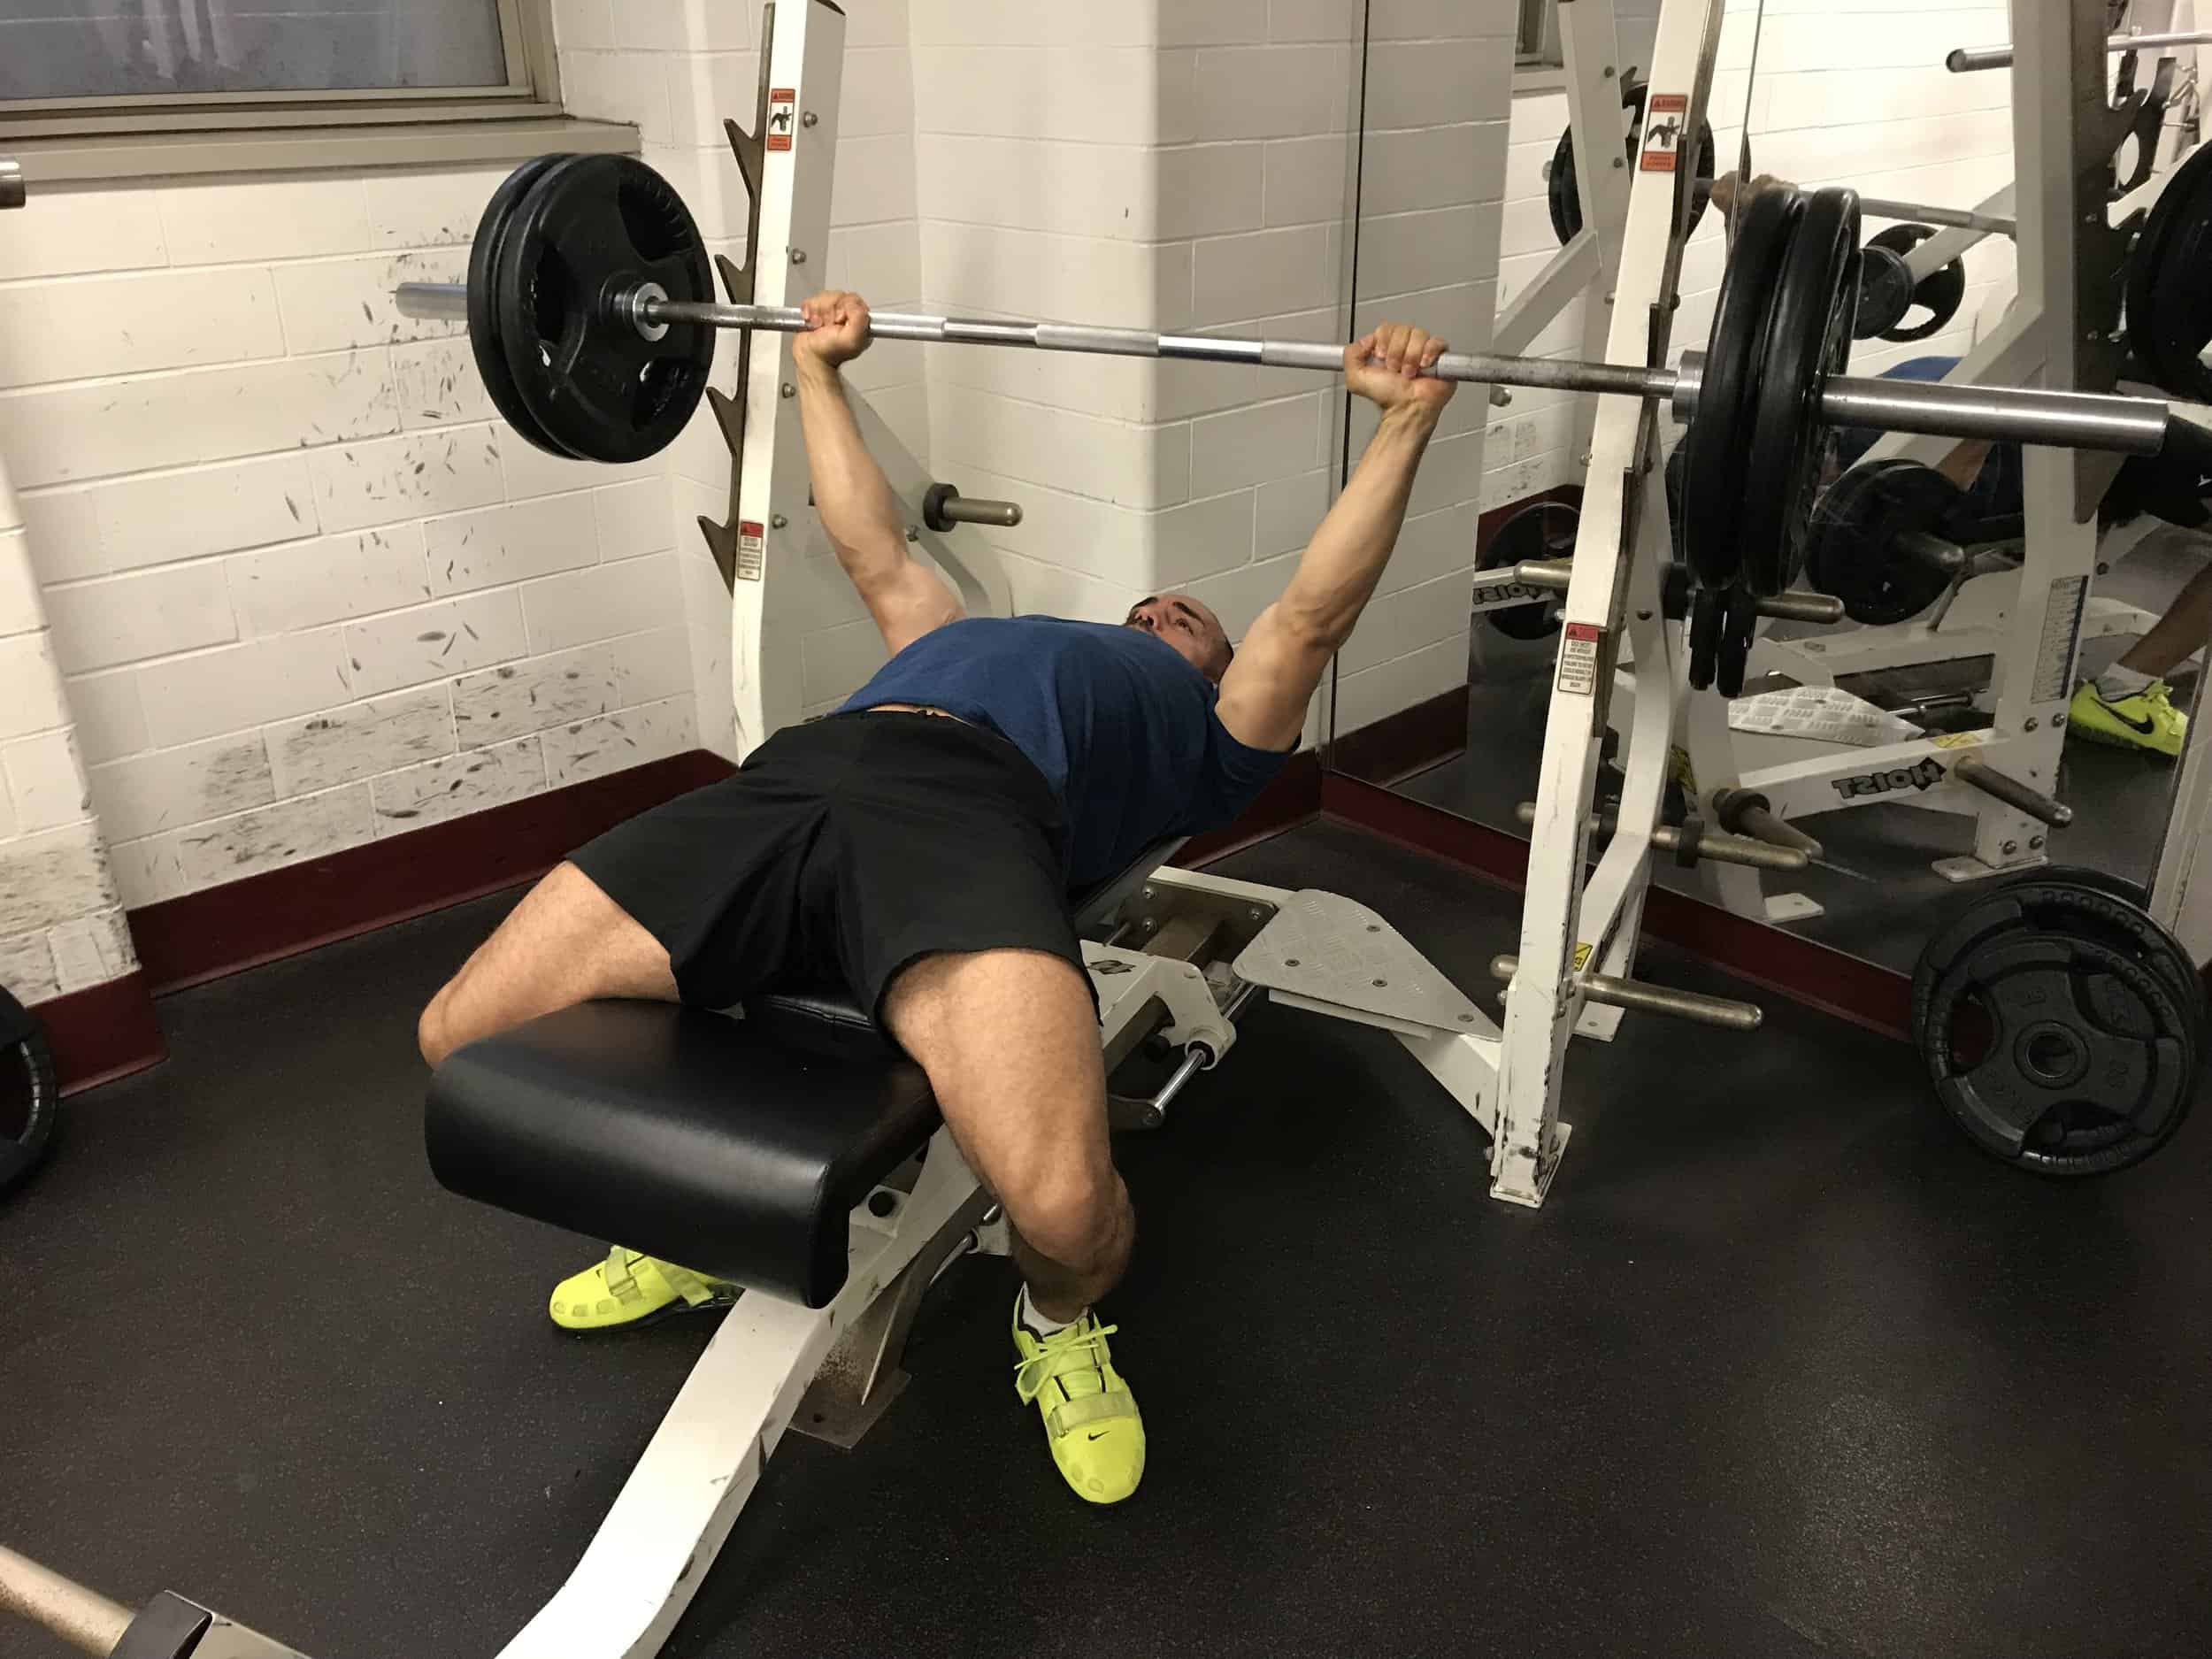 alex-doing-bench-press-exercise on his back